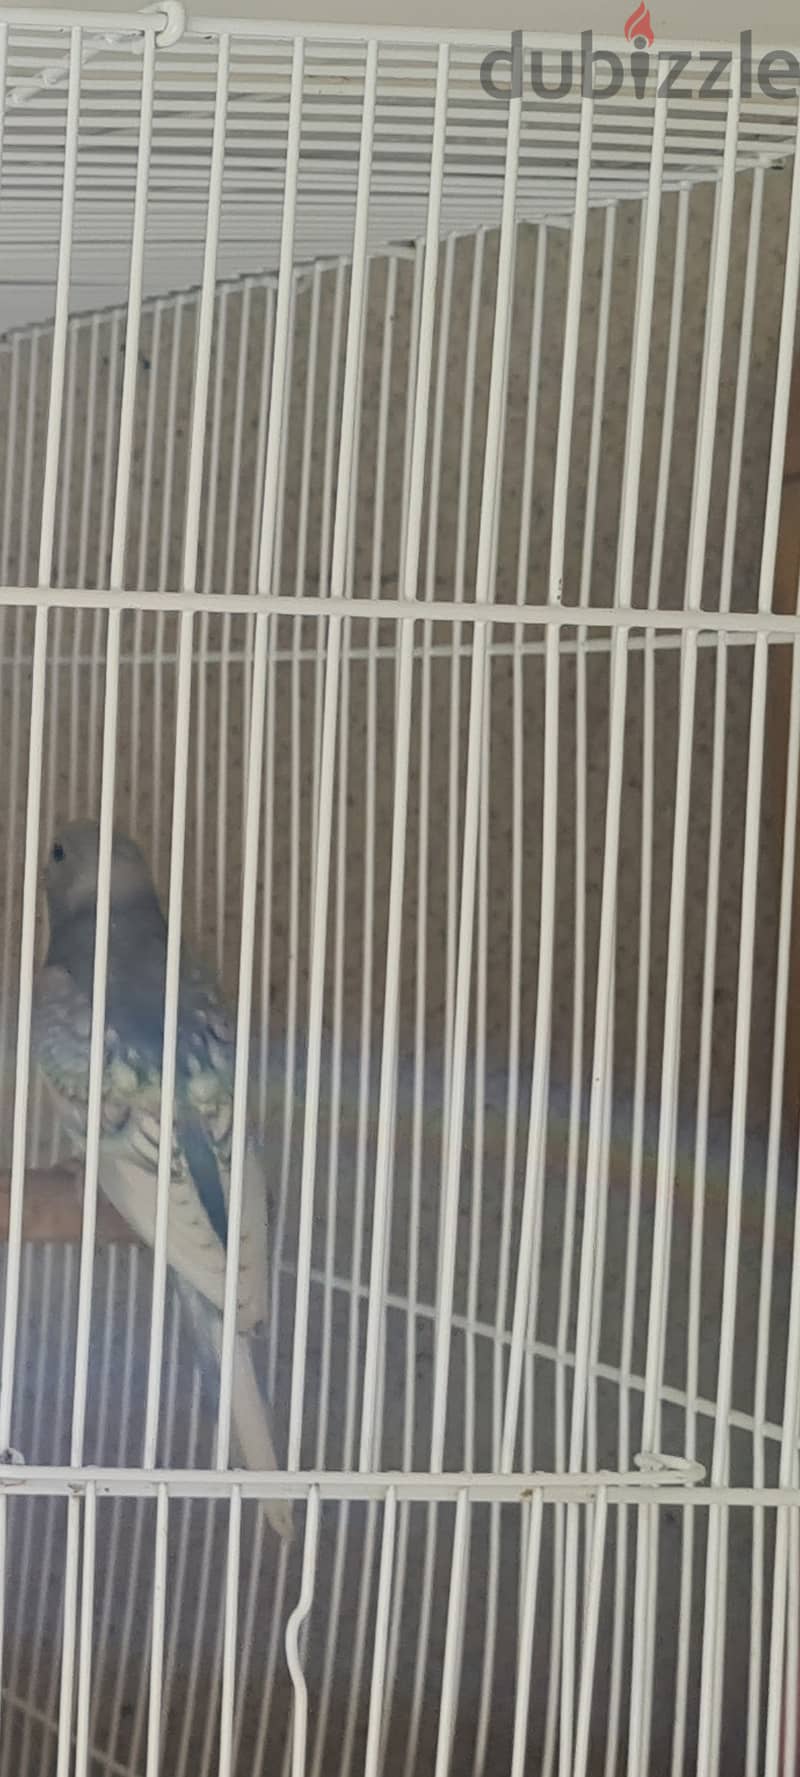 3 home breed budgies 2